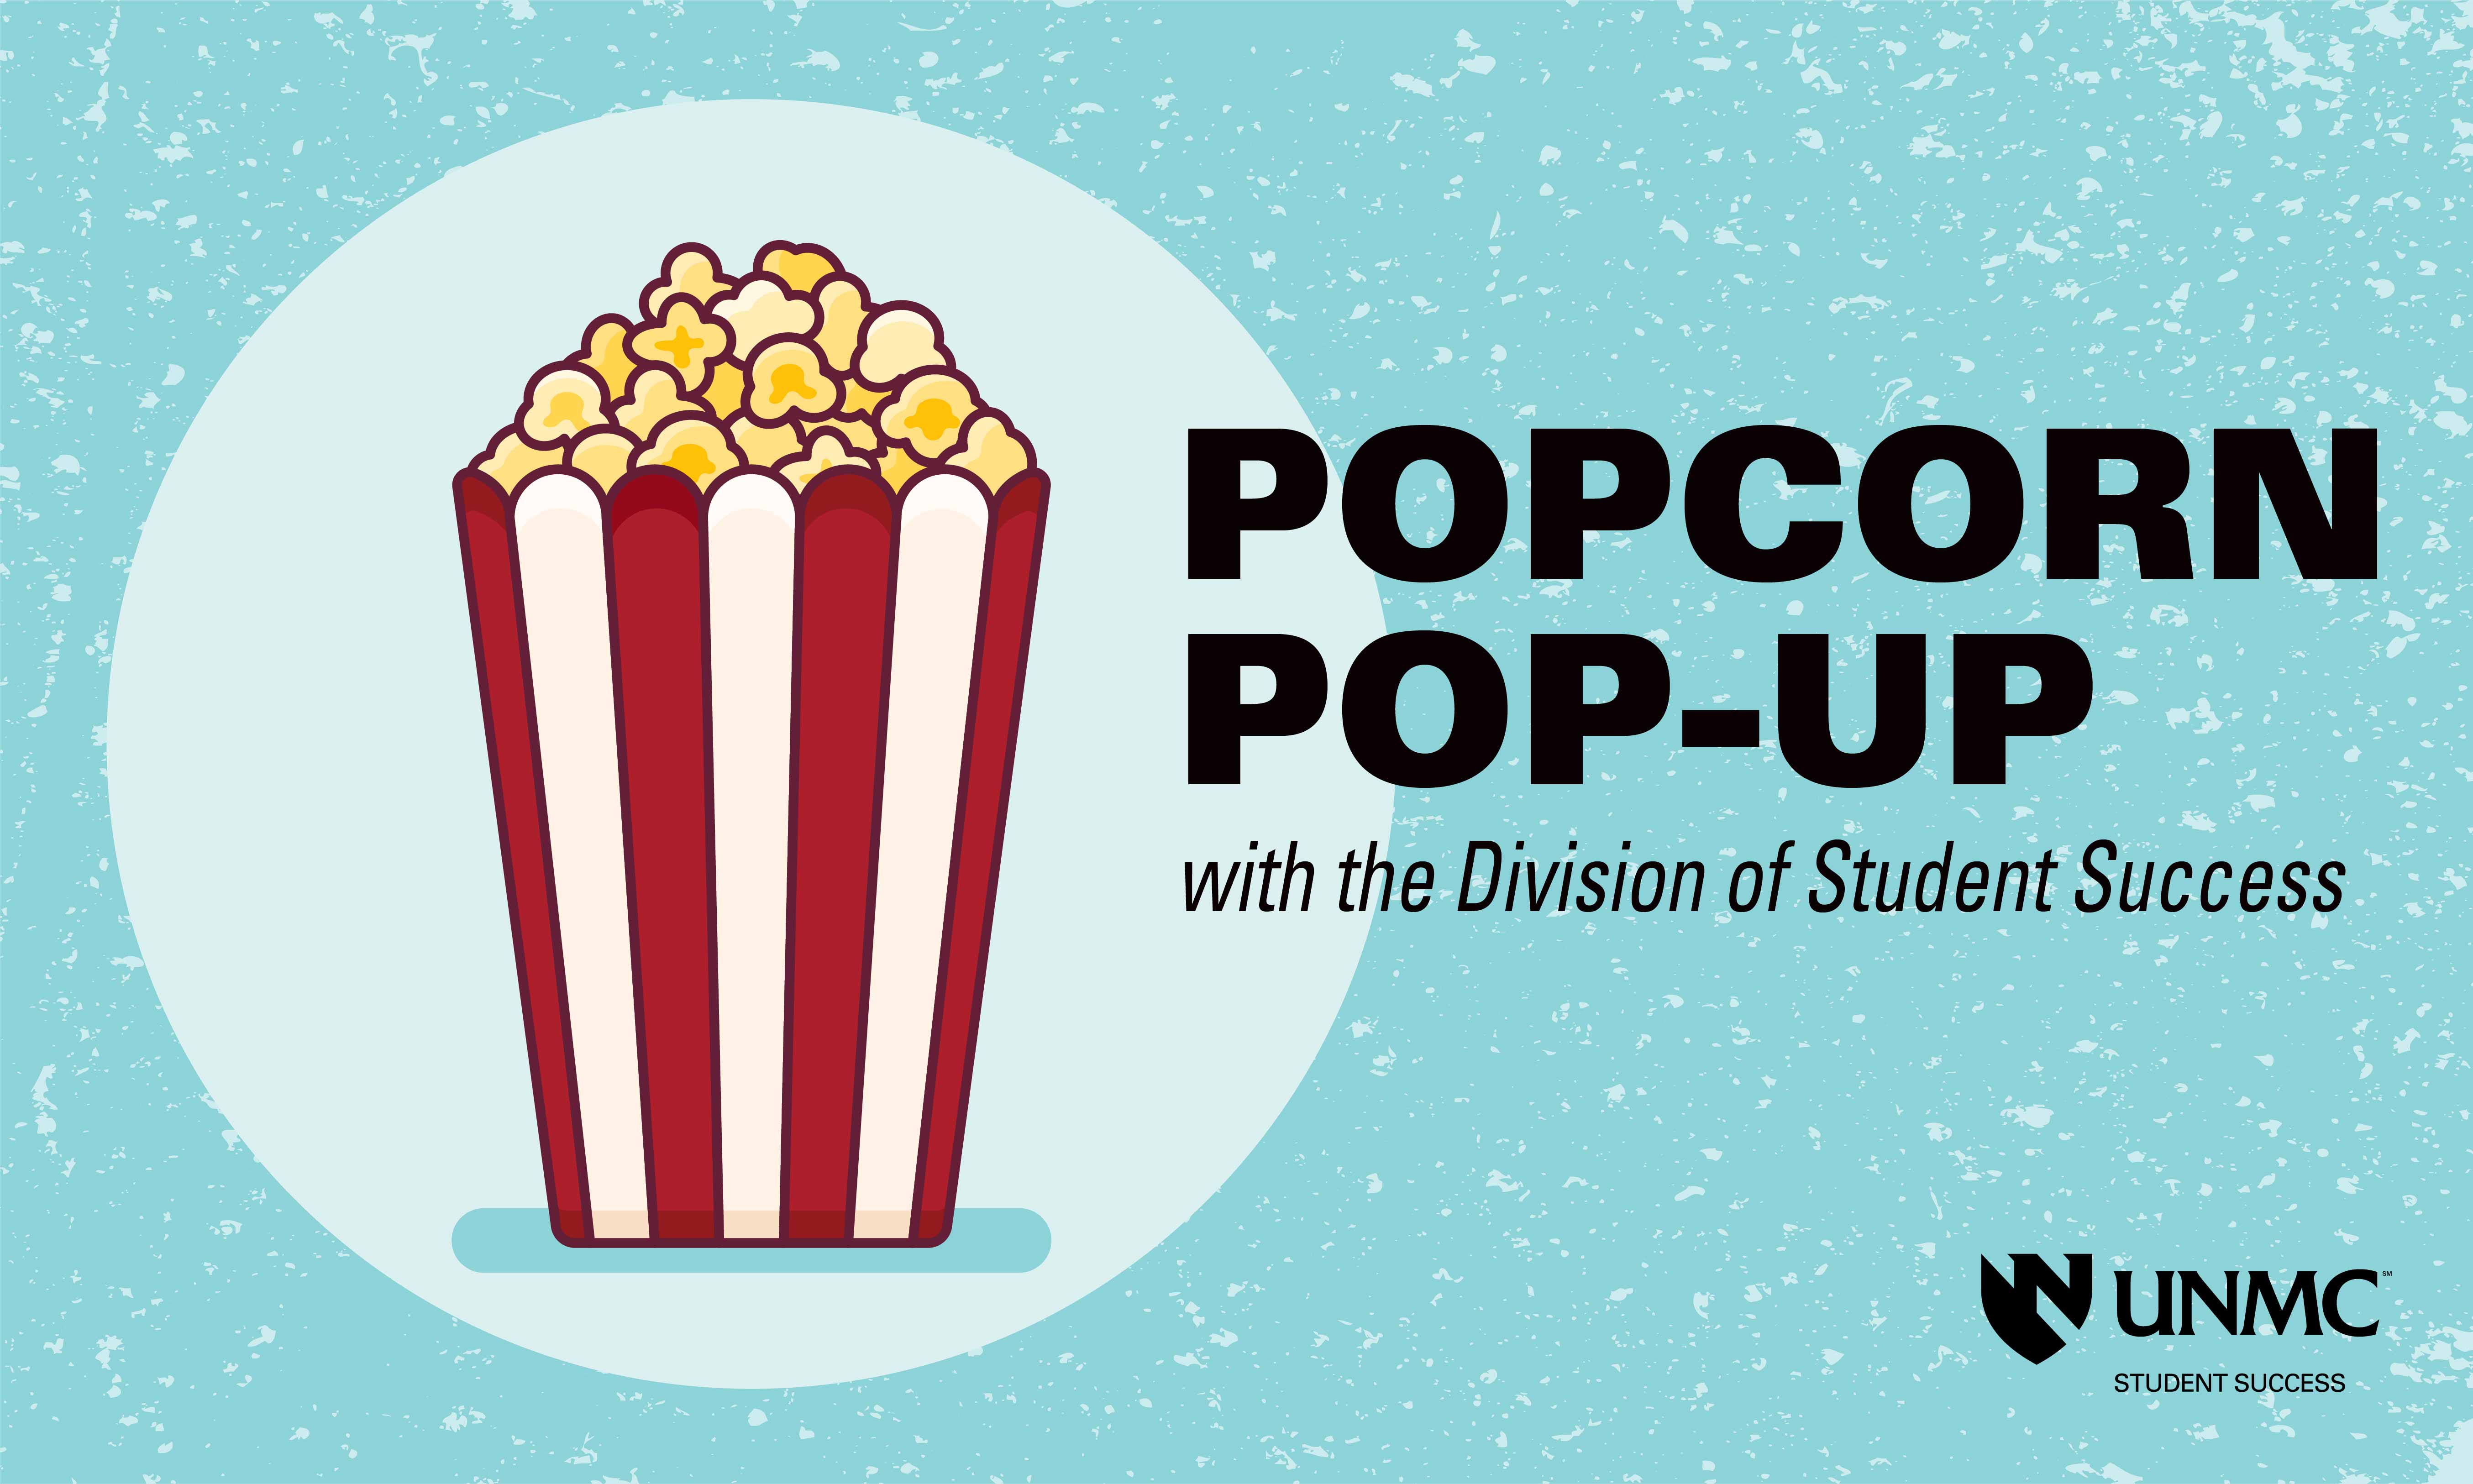 Graphic of a bucket of popcorn with text "Popcorn Pop-Up with the Division of Student Success"